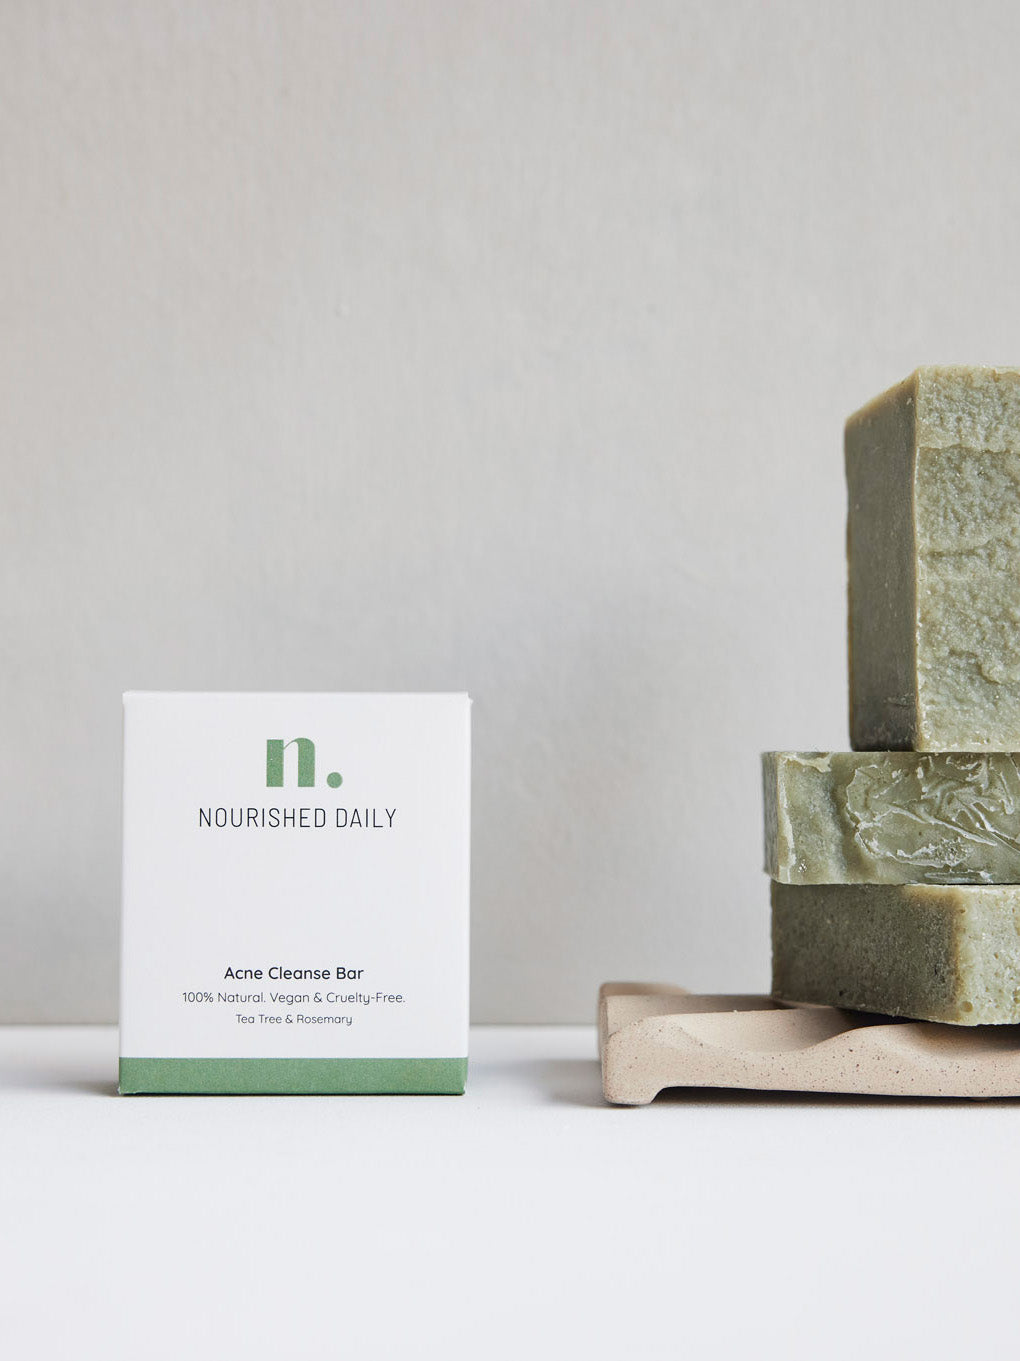 Natural Skincare, Skincare, Cleanse bar, Acne cleanse bar, Acne treatment, Nourished Daily.